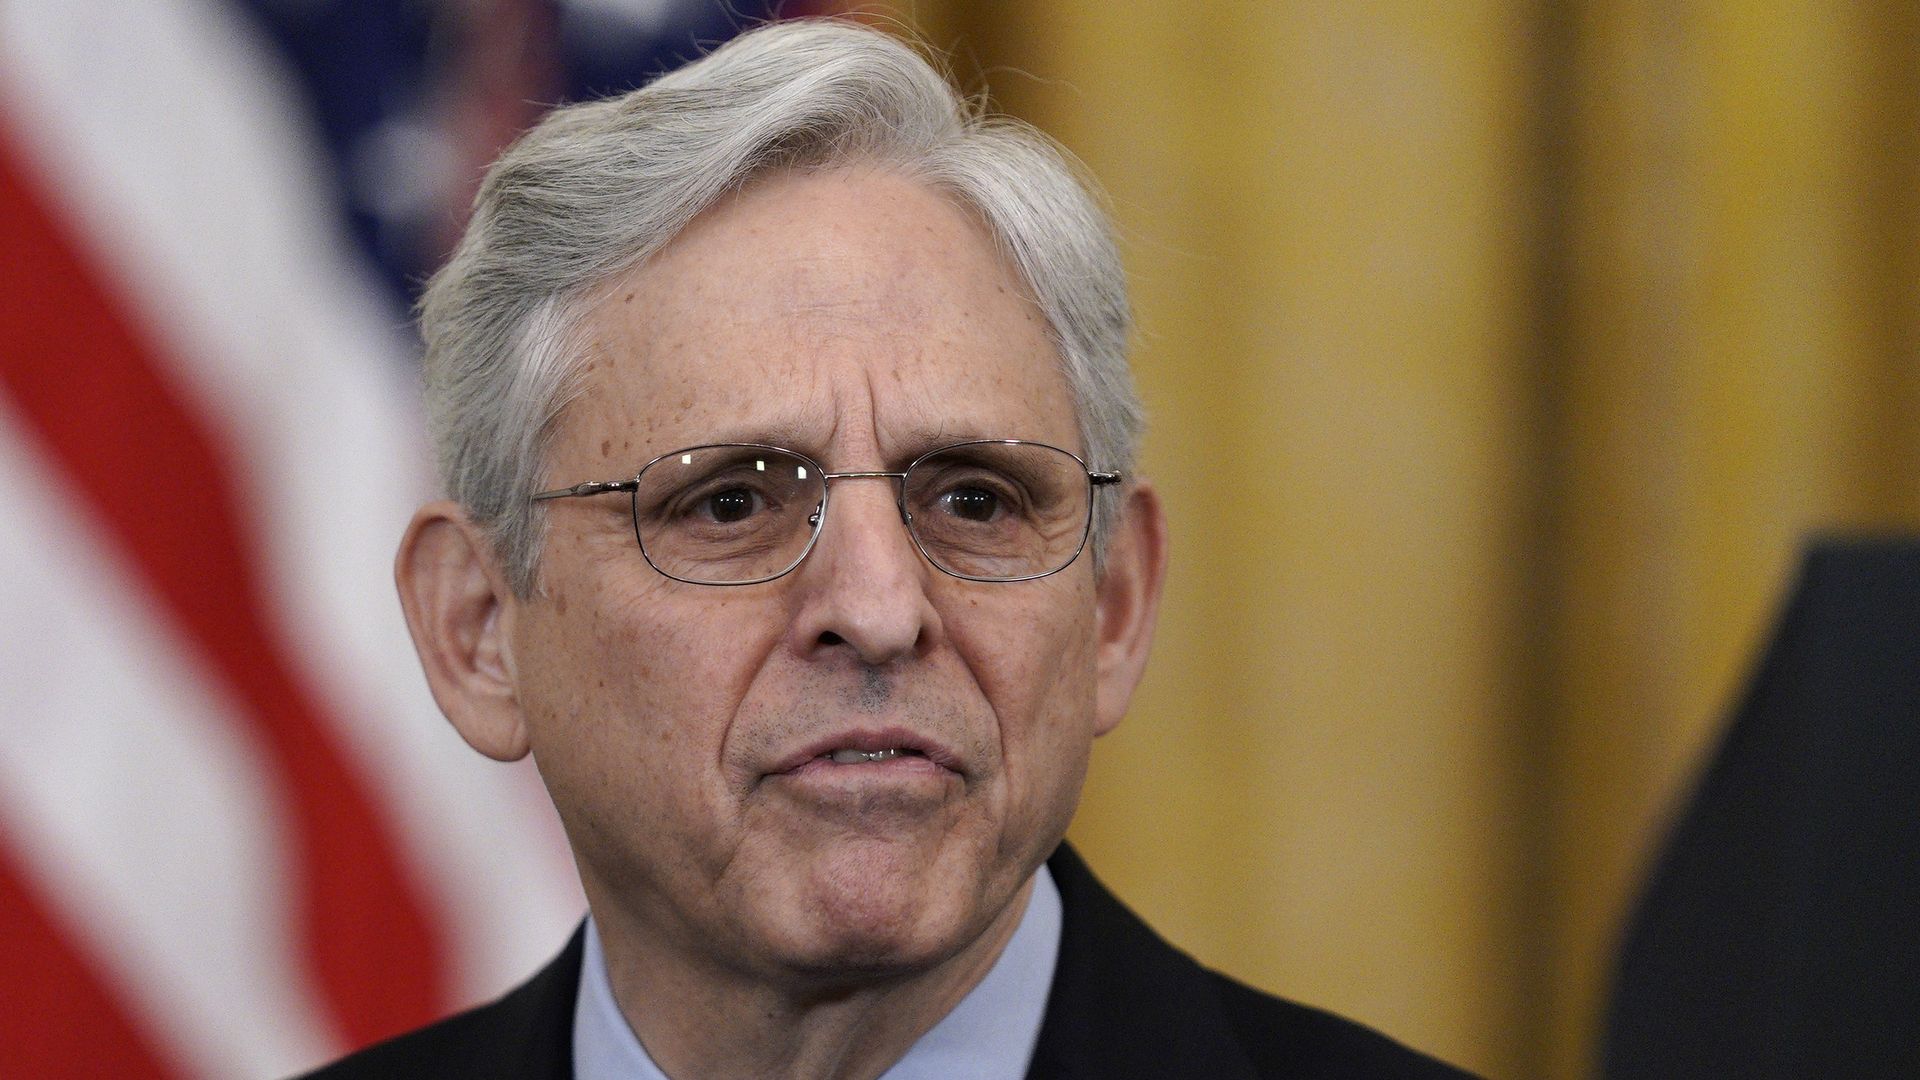 Merrick Garland wears a suit and tie